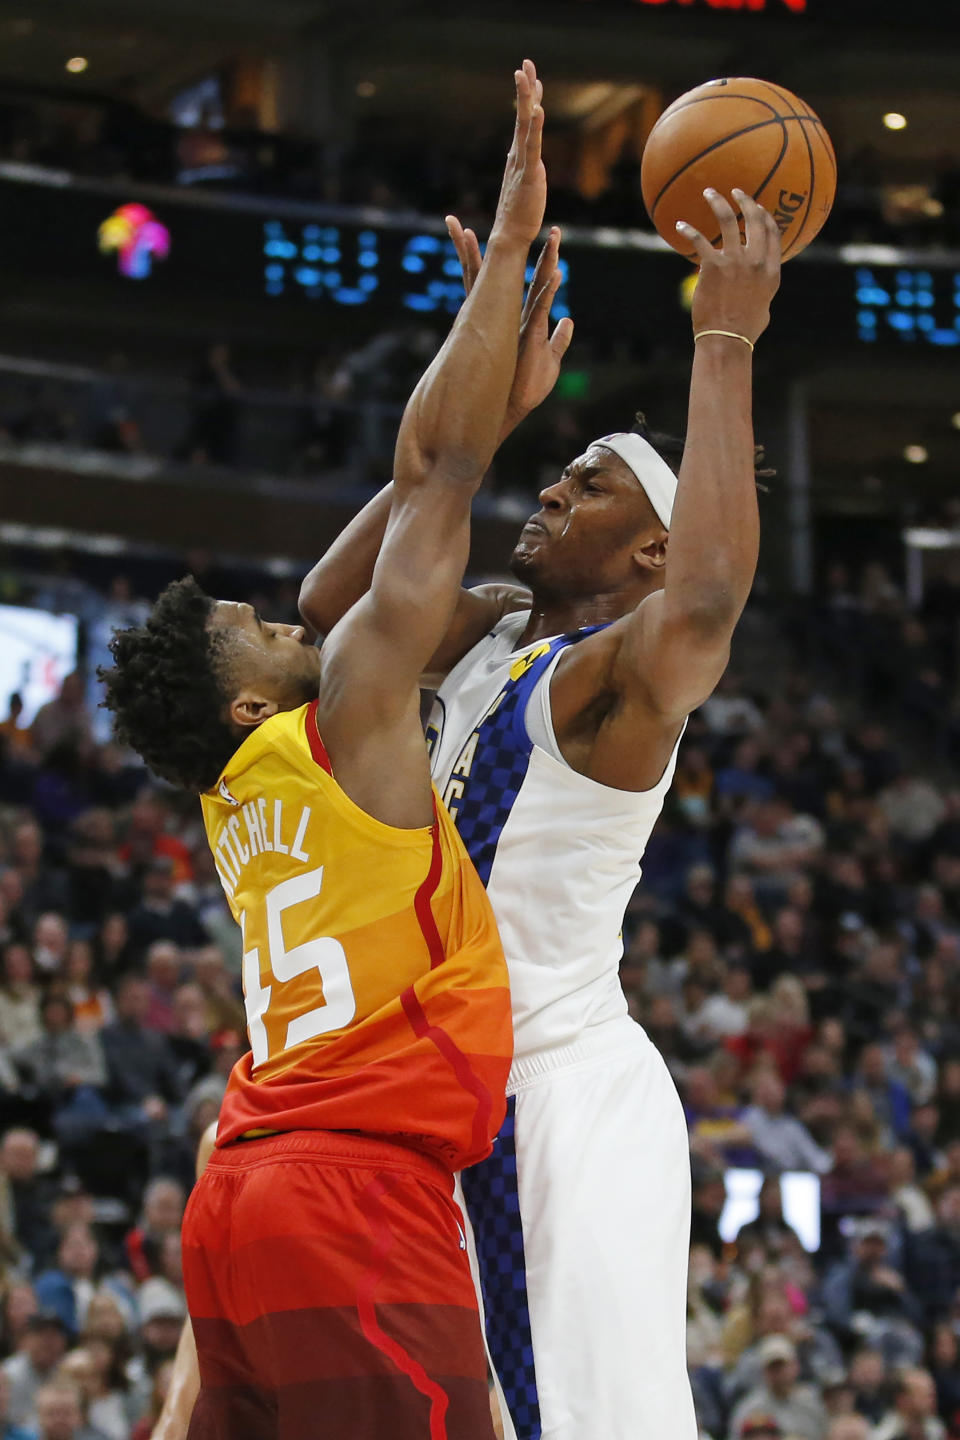 Utah Jazz guard Donovan Mitchell (45) defends against Indiana Pacers center Myles Turner, right, in the first half of an NBA basketball game Monday, Jan. 20, 2020, in Salt Lake City. (AP Photo/Rick Bowmer)